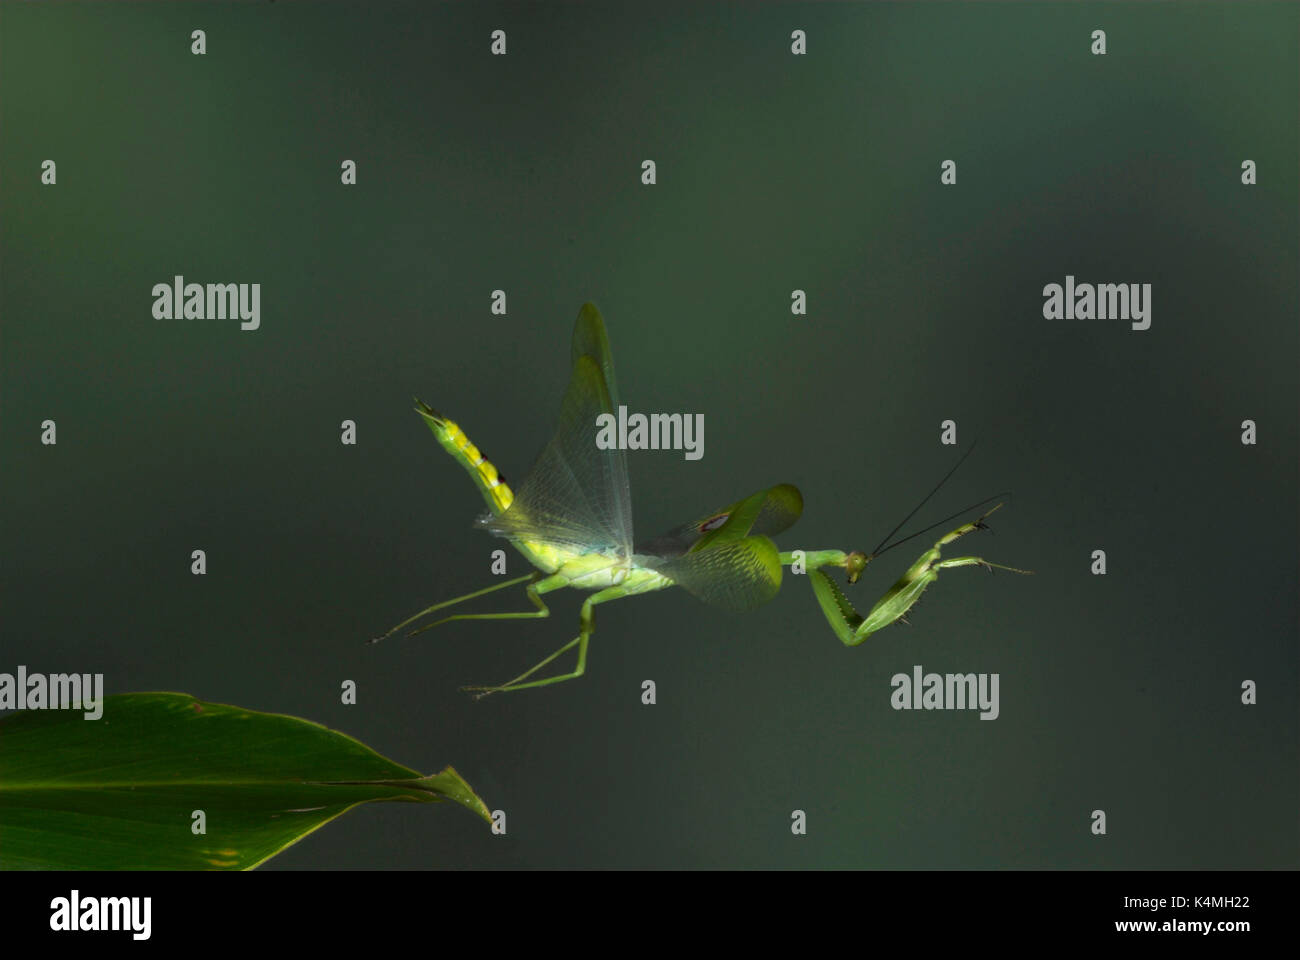 Praying Mantis, in flight, Order: Mantodea, Costa Rica, High Speed Photographic Technique, flying, tropical jungle, green, eye spots on wings, leaping Stock Photo